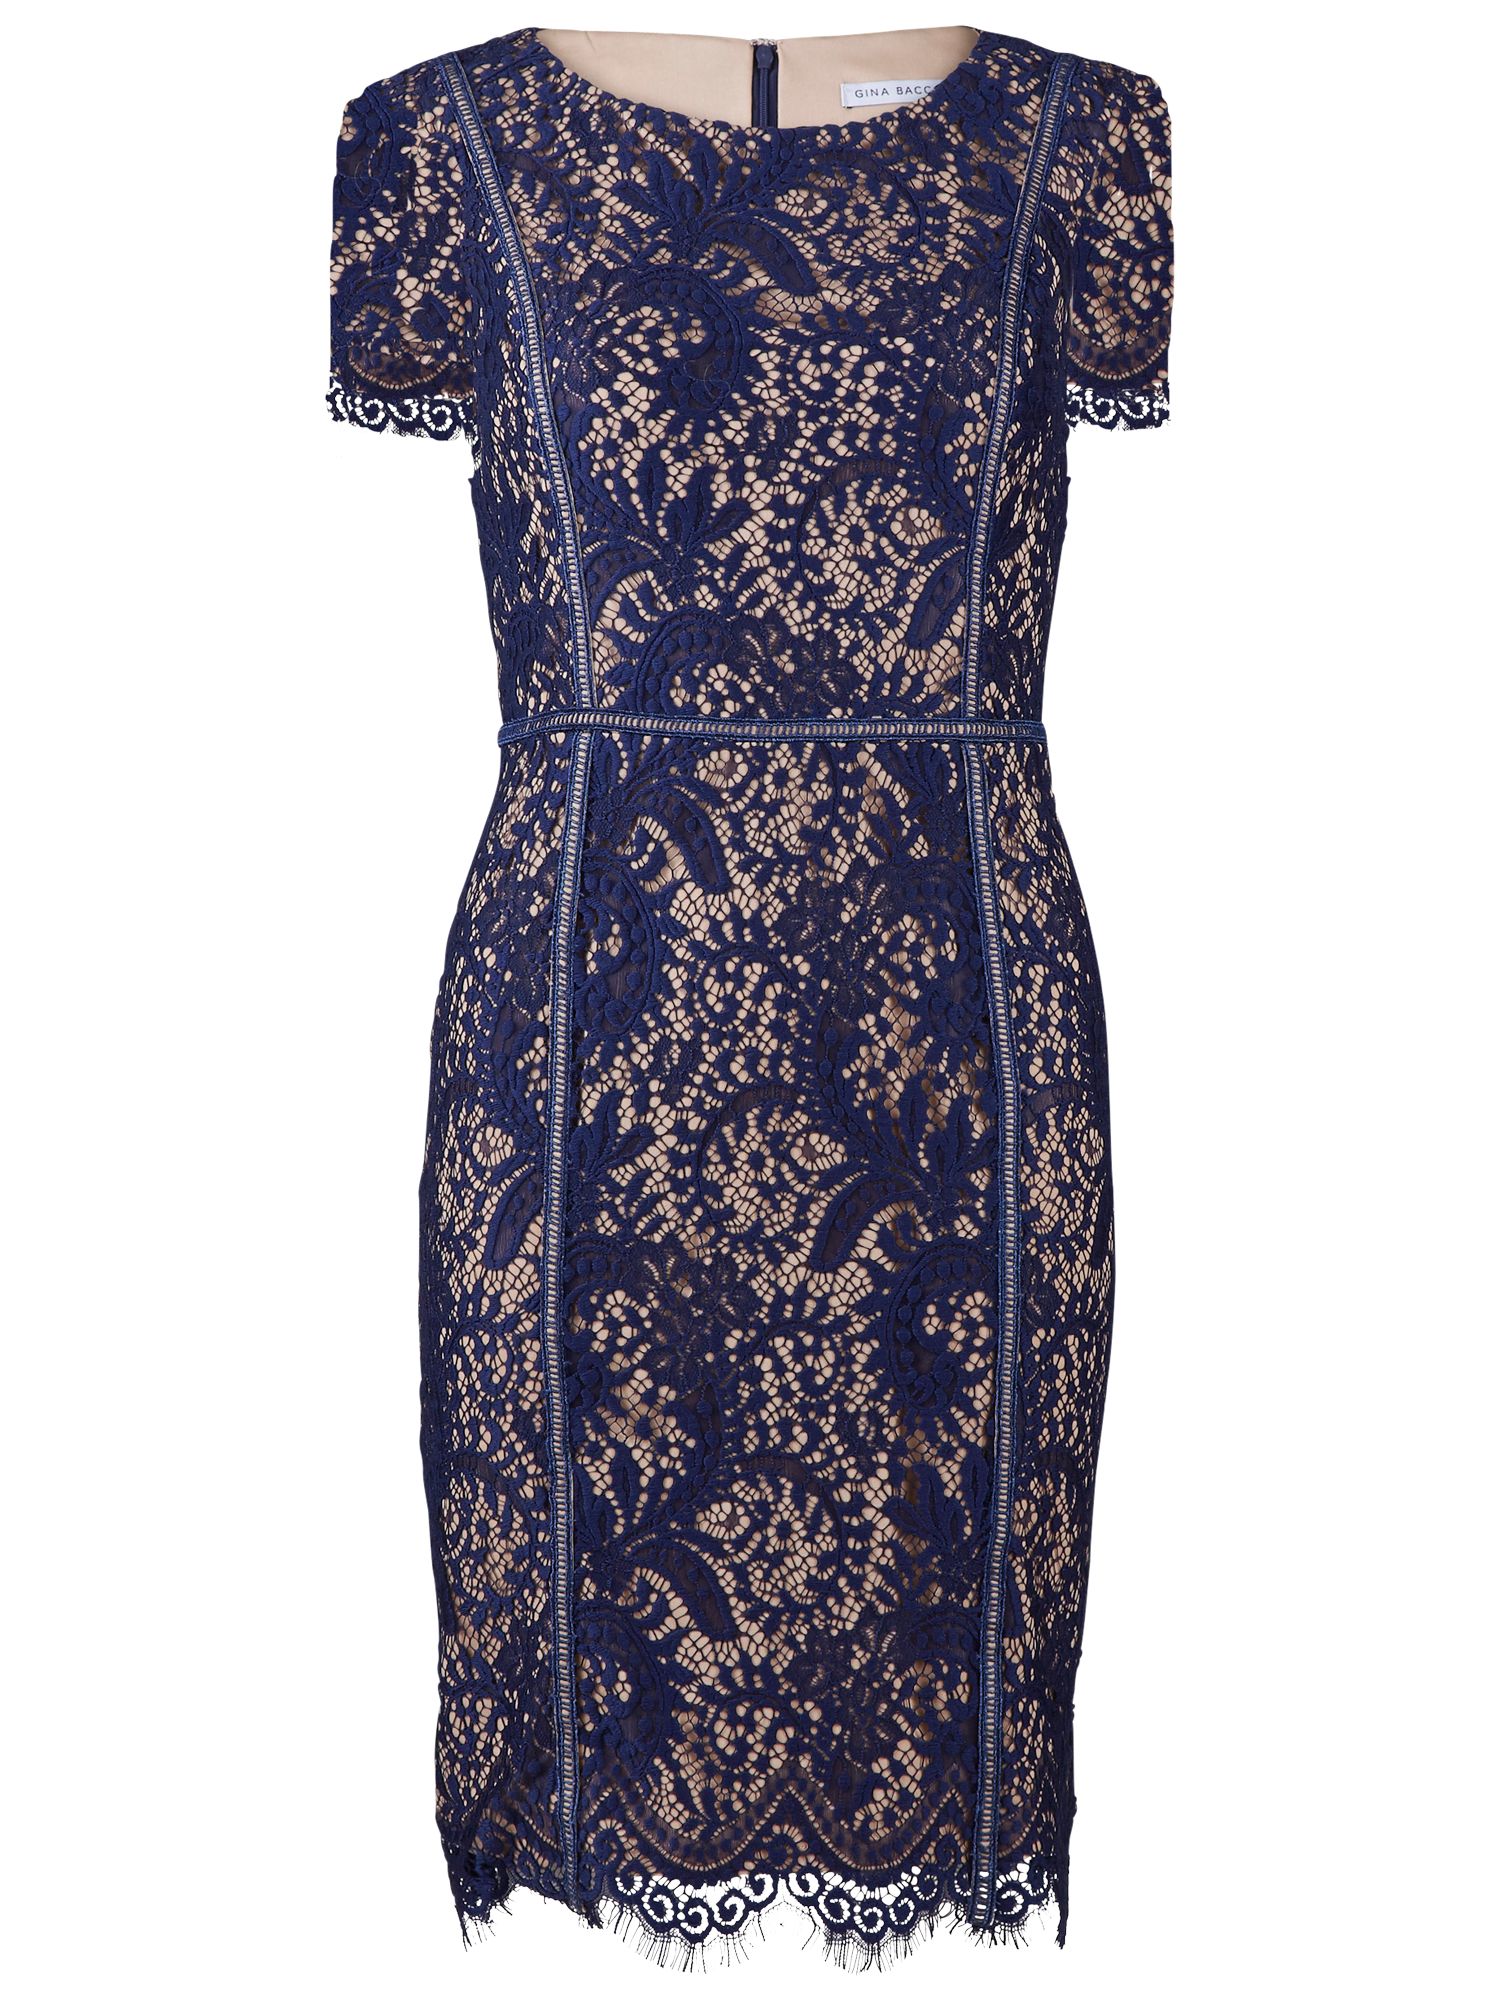 Gina Bacconi Floral Scroll Fringed Scallop Lace Dress, Navy